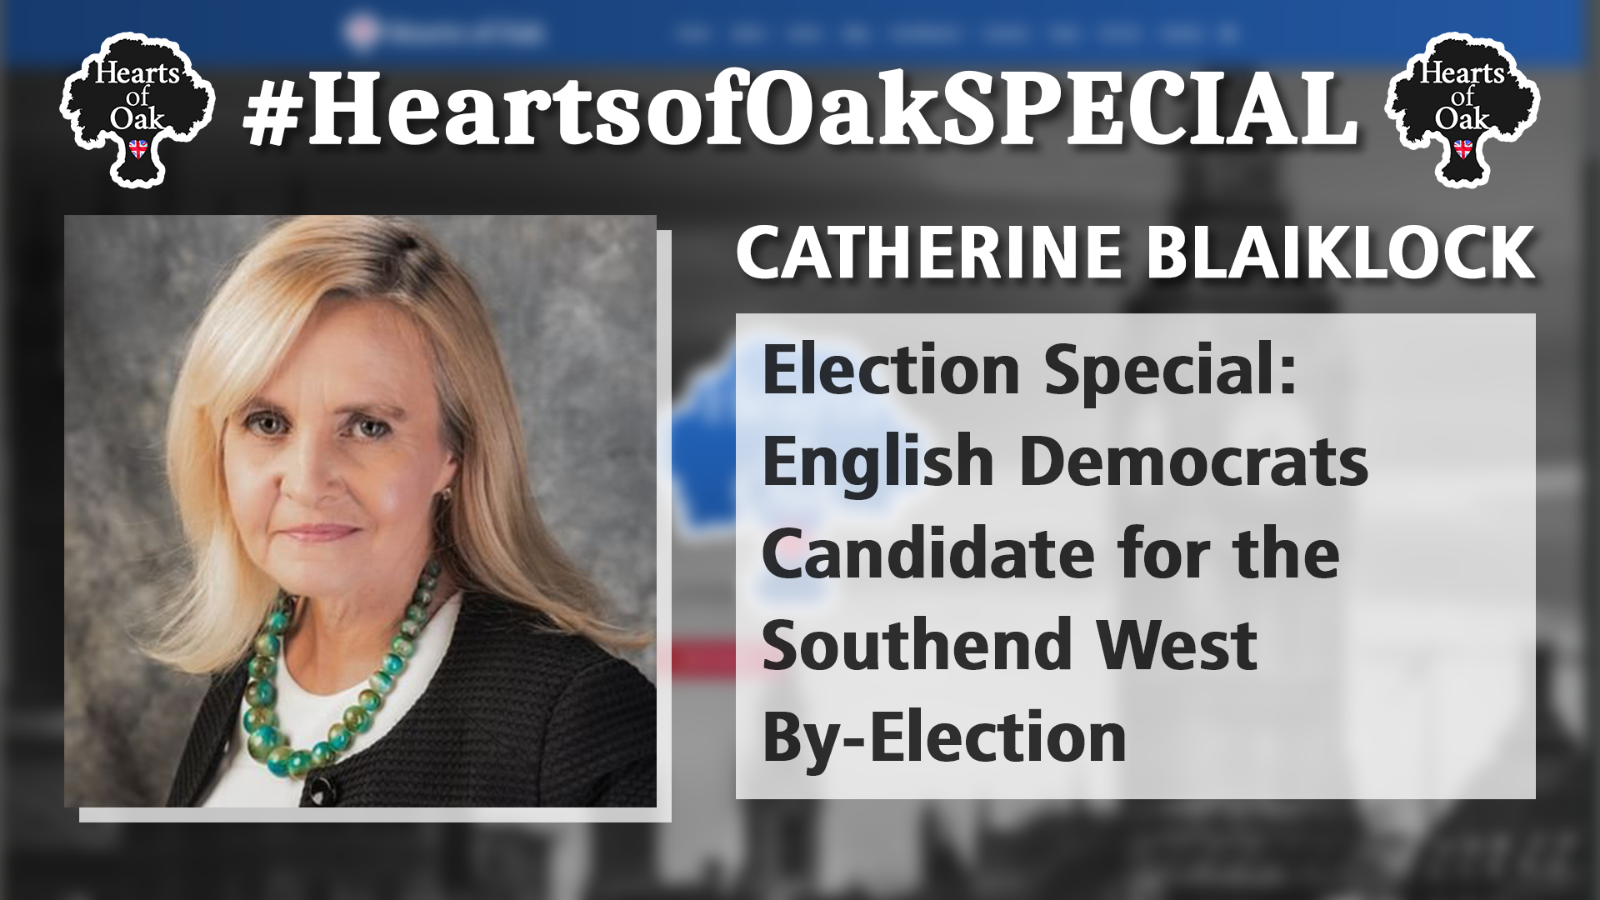 Catherine Blaiklock - Election Special: English Democrats Candidate for the Southend W By-Election